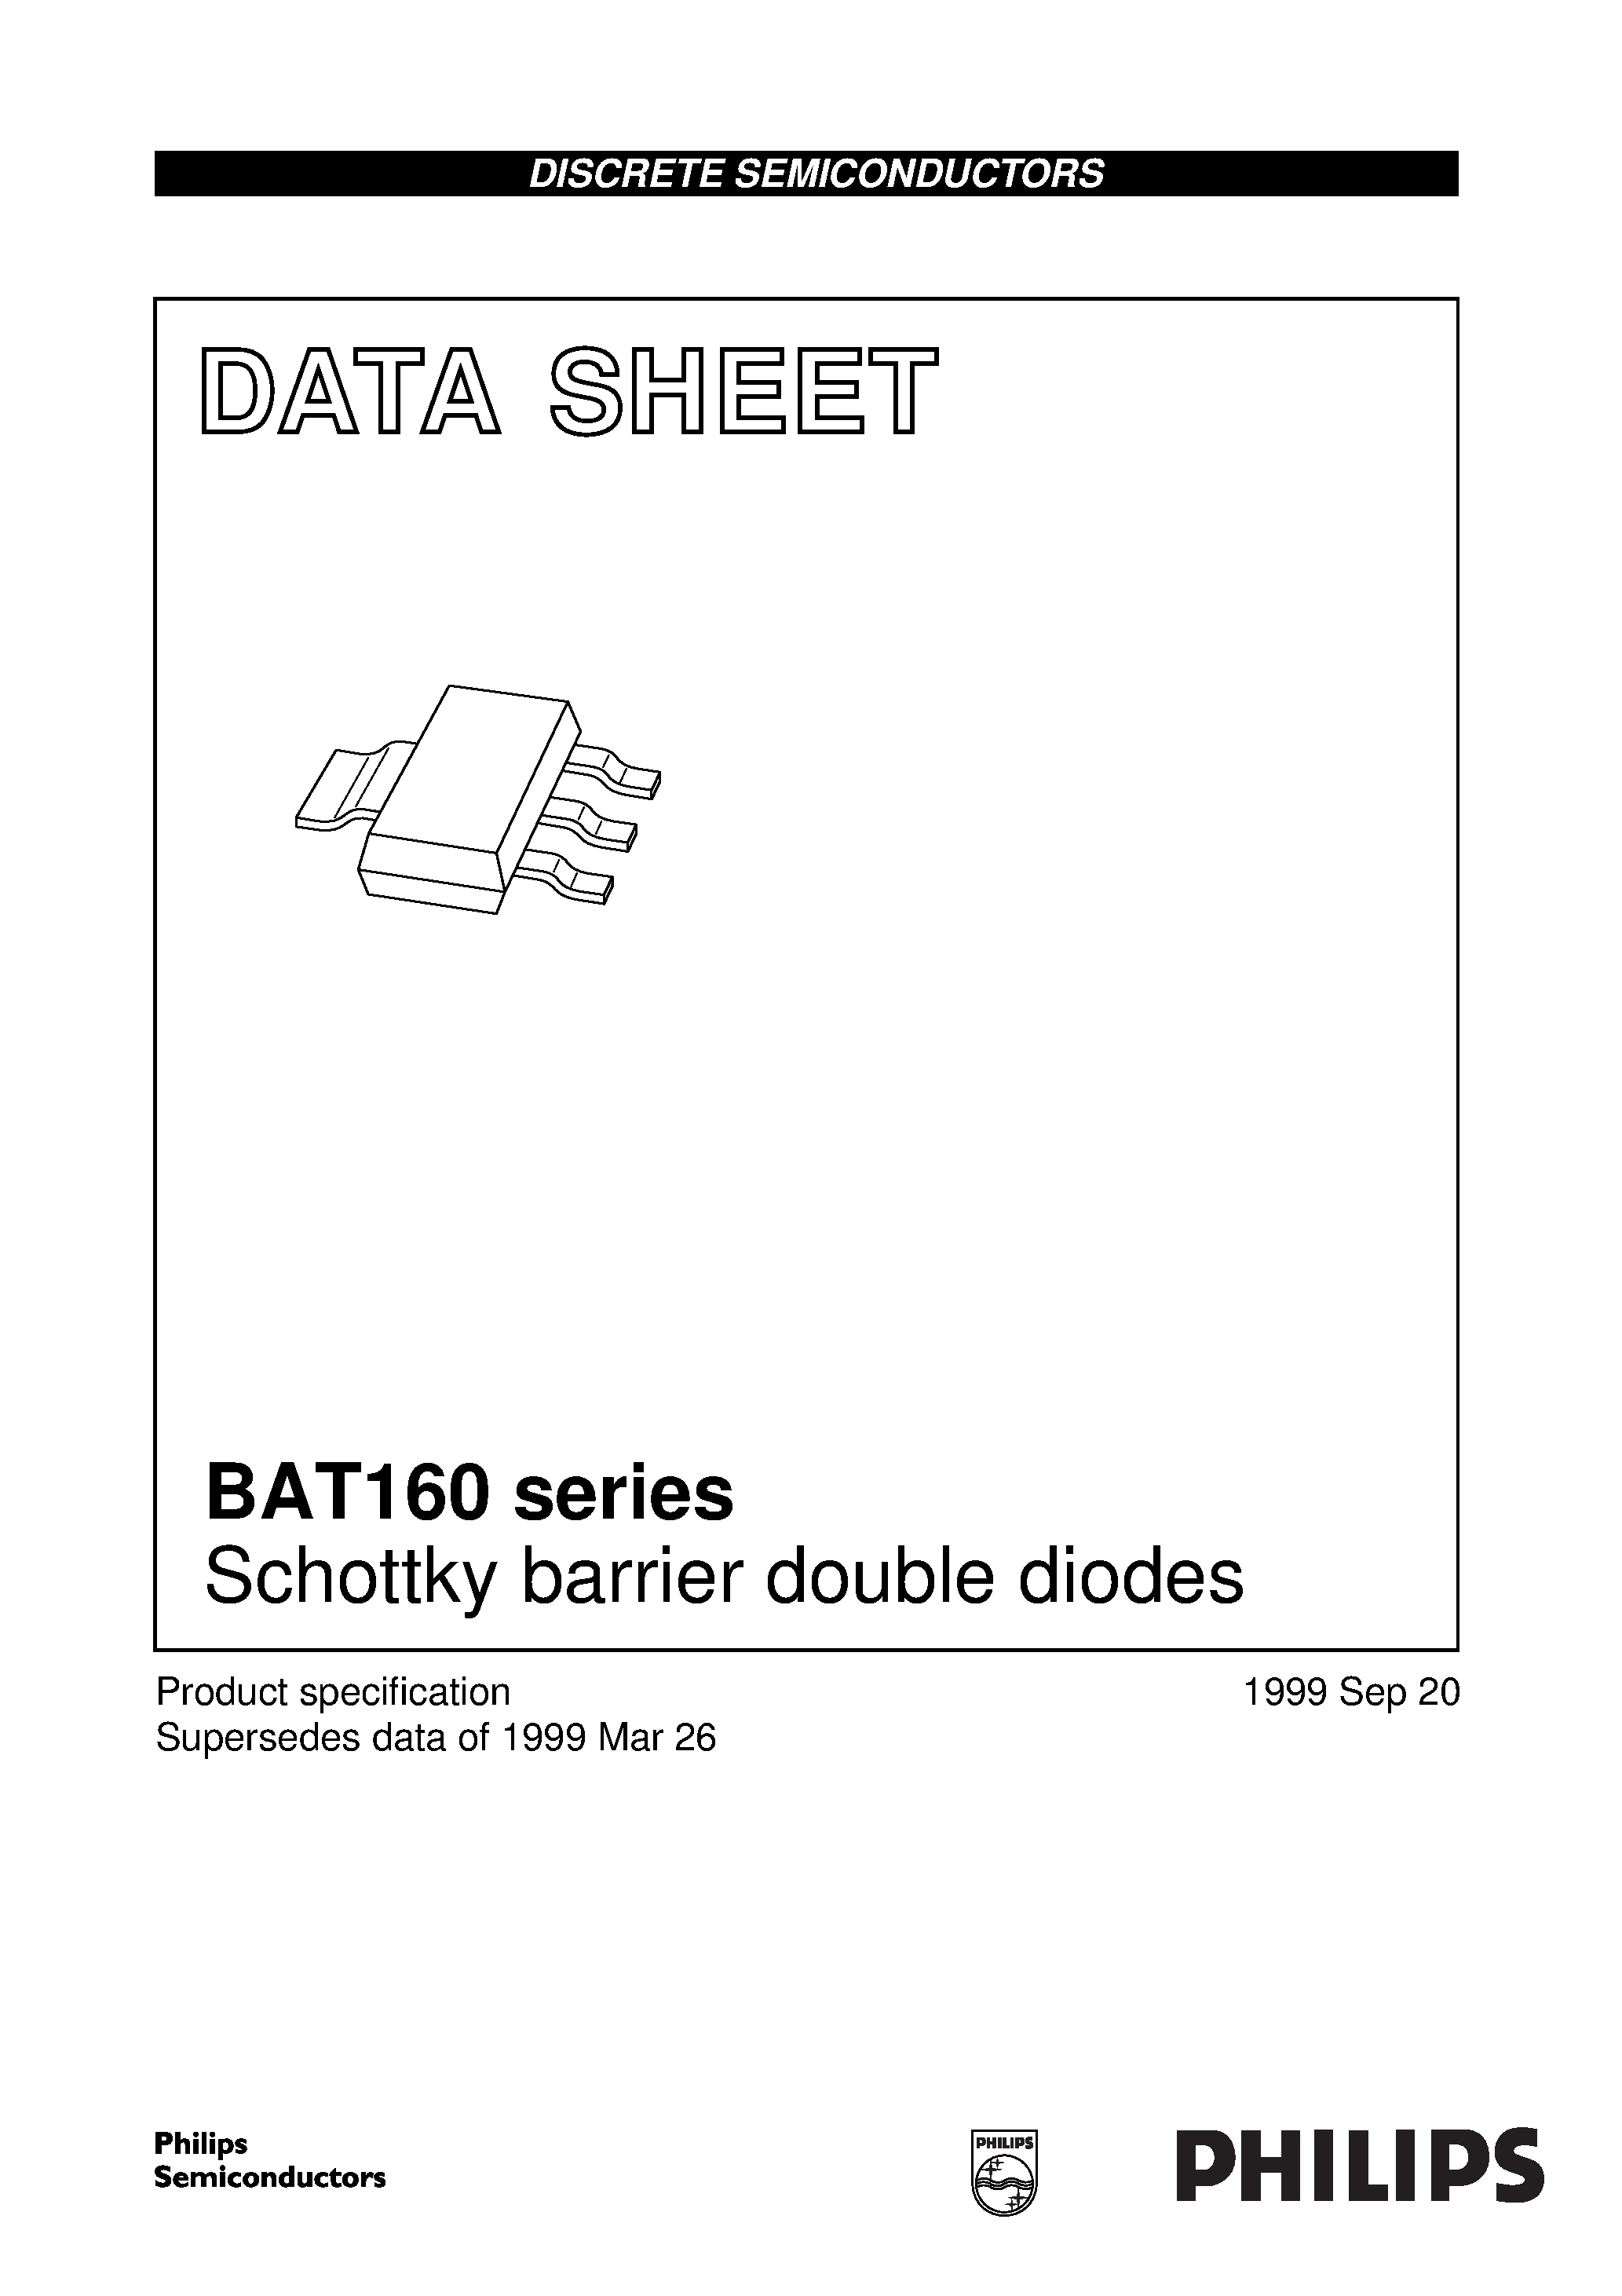 Datasheet BAT160S - Schottky barrier double diodes page 1